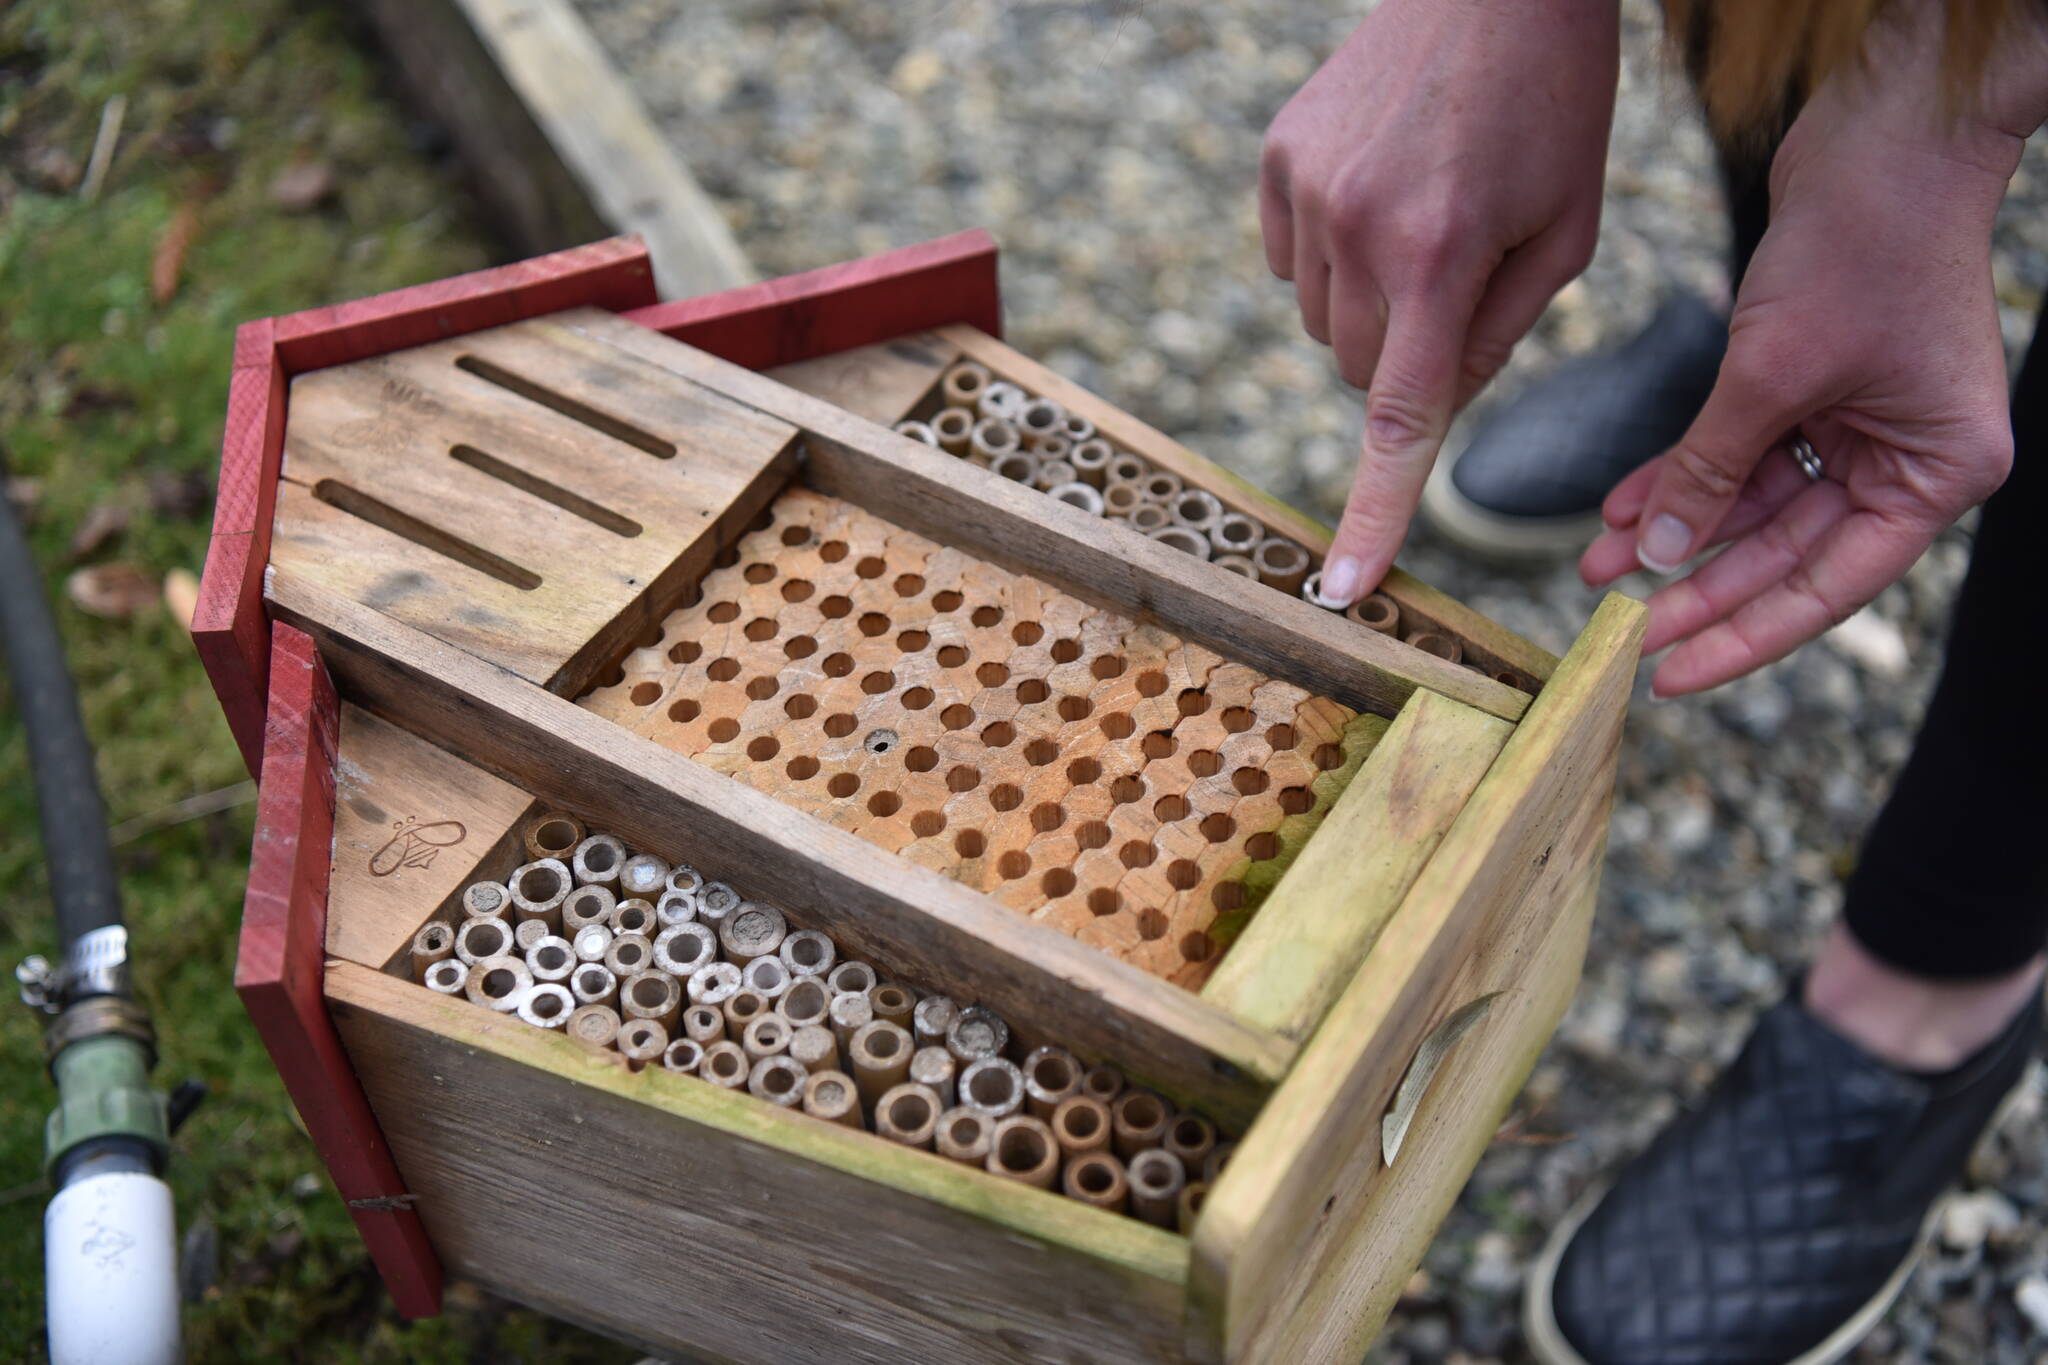 Thyra McKelvie points out that this bee house is not ideal for bees because the bamboo sticks cannot be removed for cleaning.